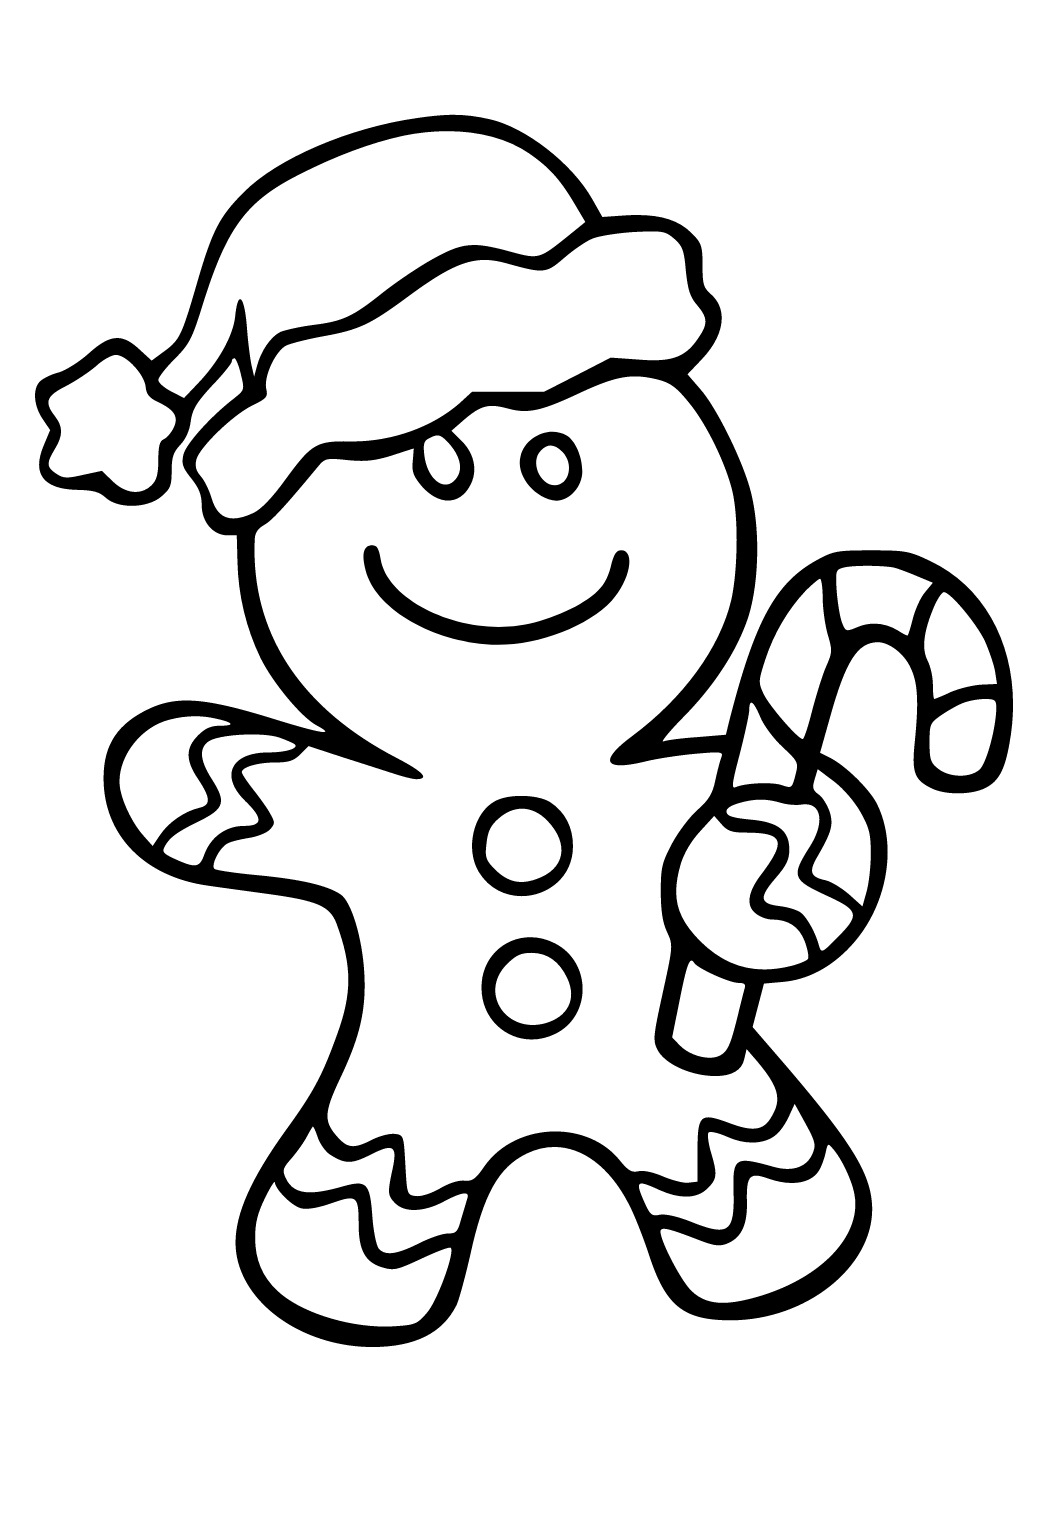 Free printable gingerbread man new year coloring page sheet and picture for adults and kids girls and boys